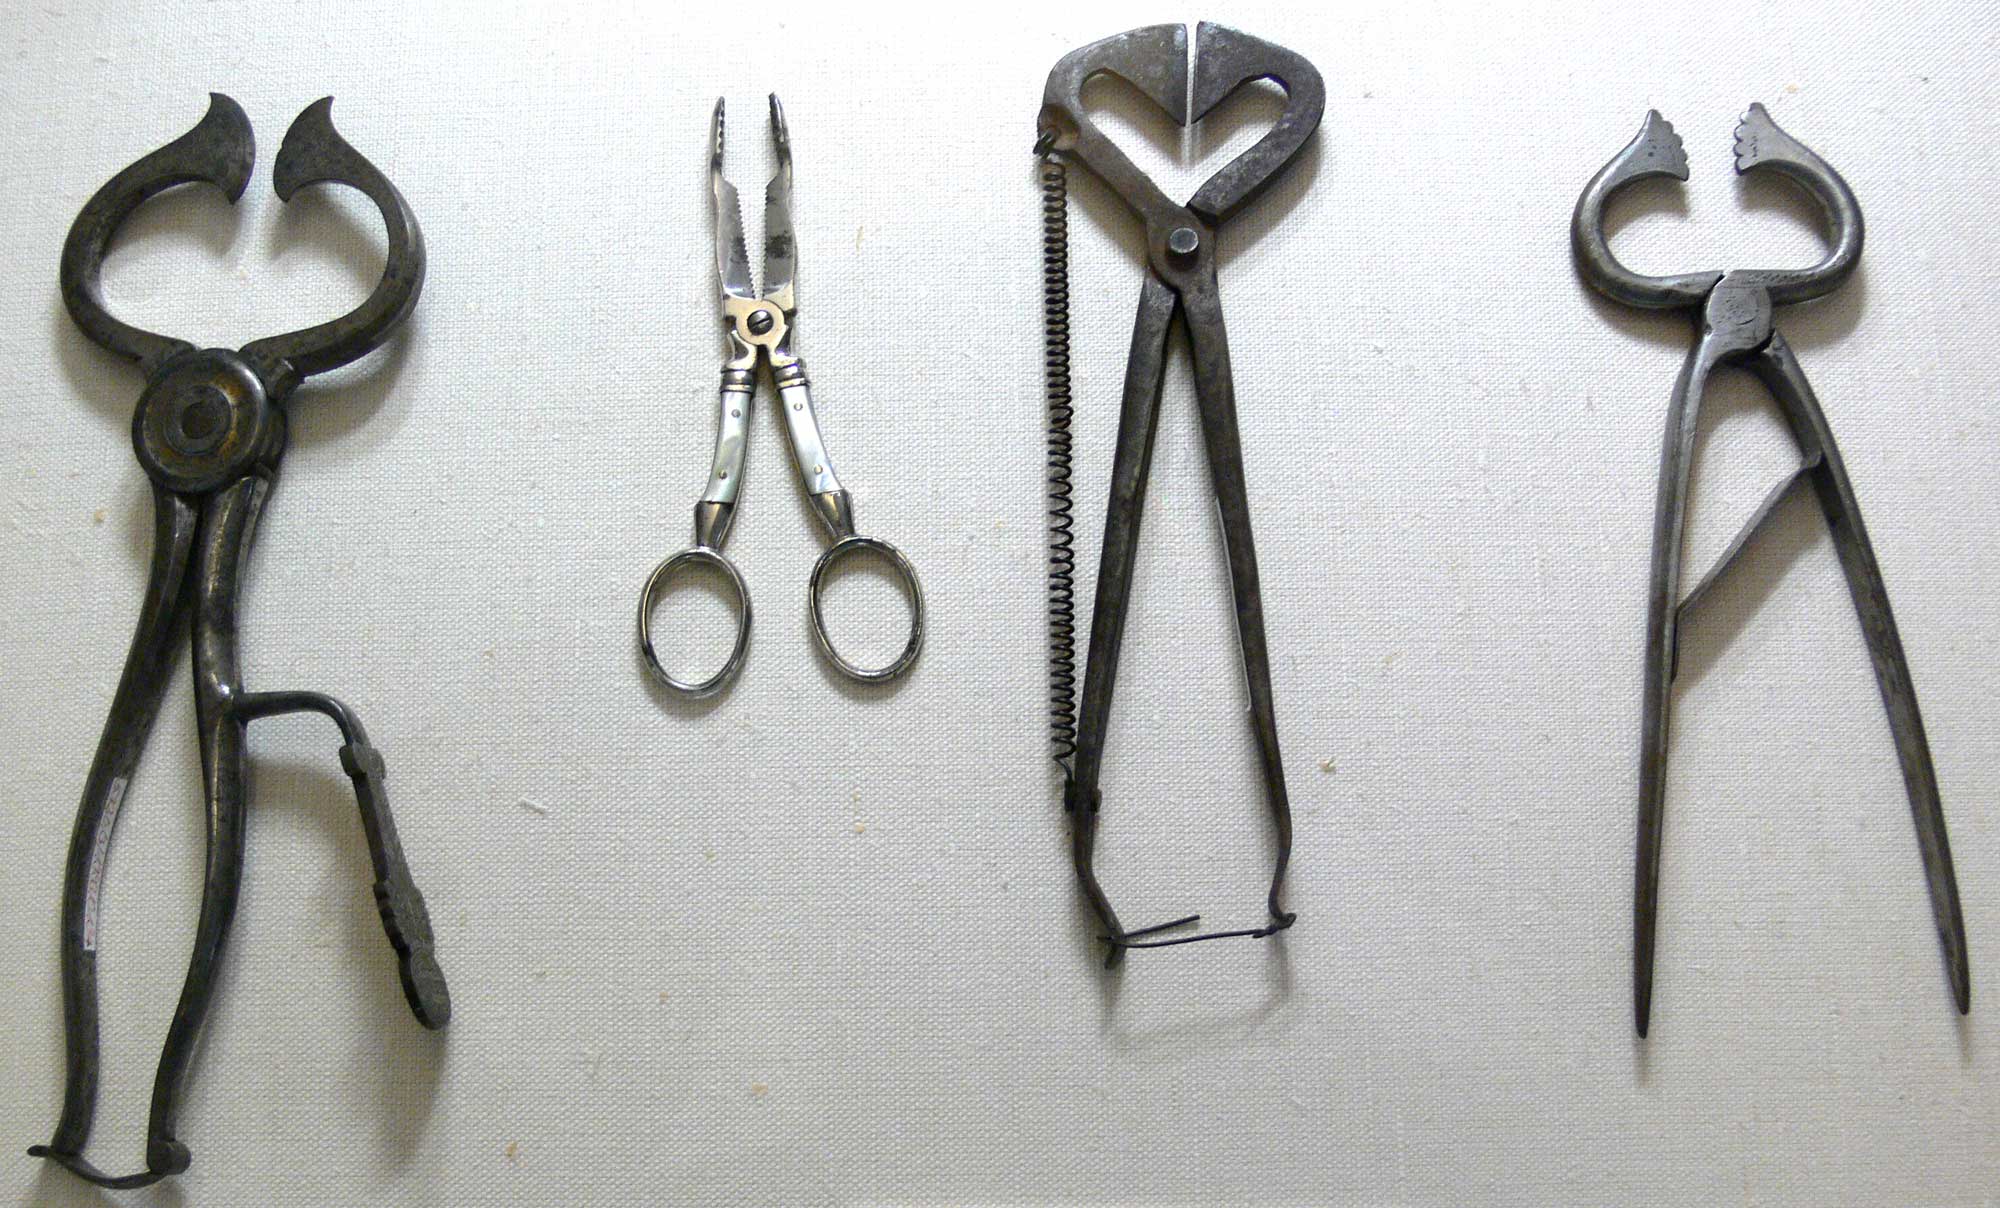 Photograph of sugar nips and sugar tongs. The photo shows three pairs of sugar nips, heavy-duty scissor-like devices for cutting pieces of sugar off of a sugar cone. One much smaller pair of sugar tongs, used for picking up sugar, is also shown.